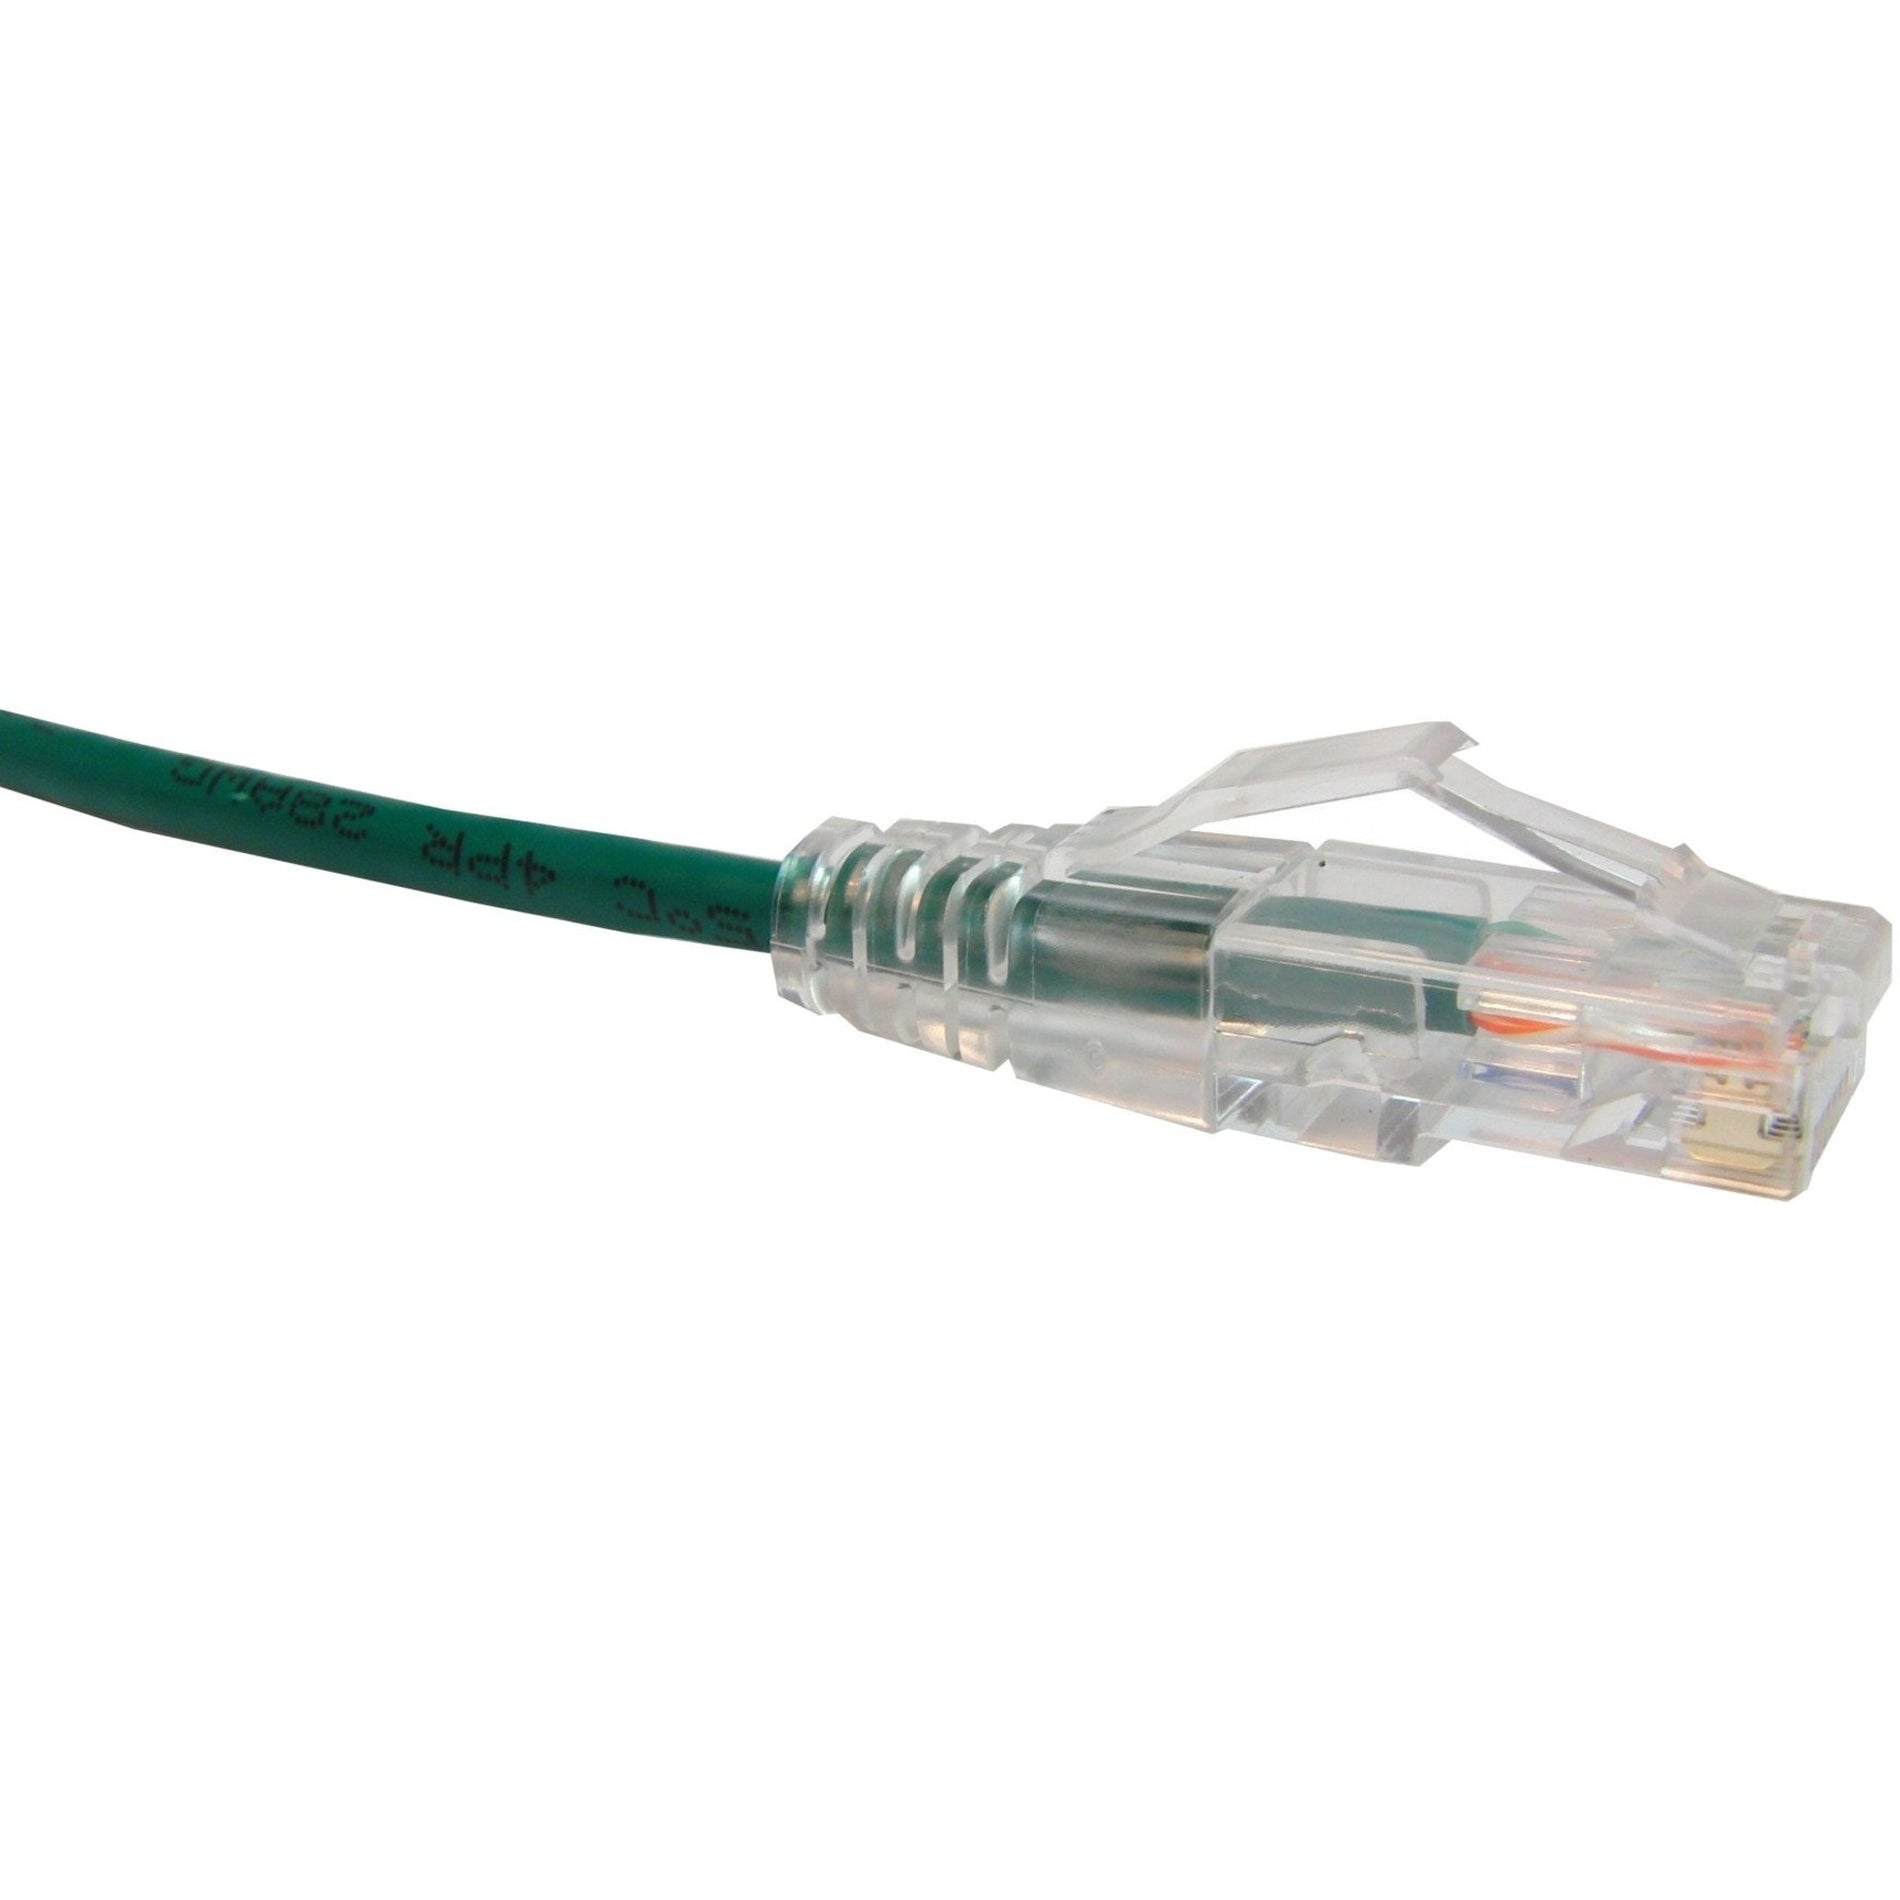 Unirise CS6-15F-GRN Clearfit Slim Cat6 Patch Cable, Green, 15ft